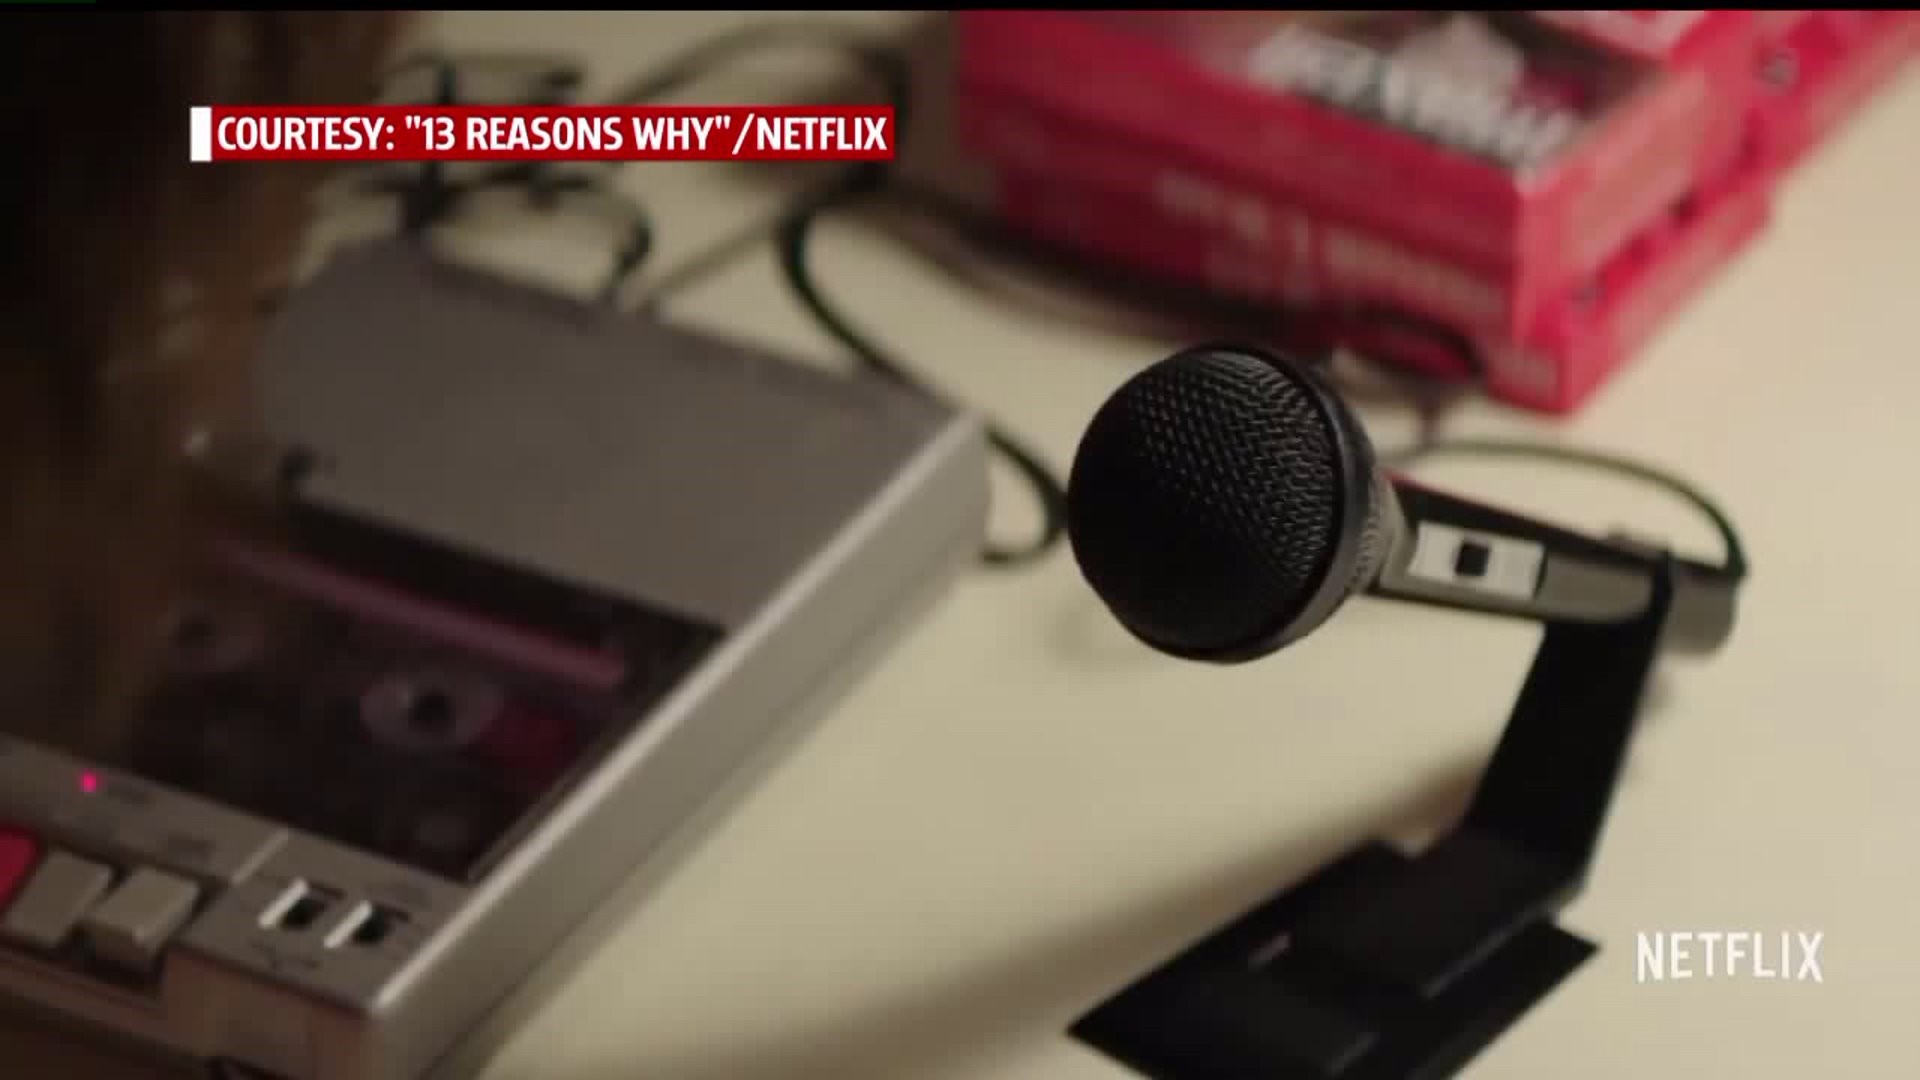 Mixed reactions to Netflix series "13 Reasons Why" across Central Pennsylvania